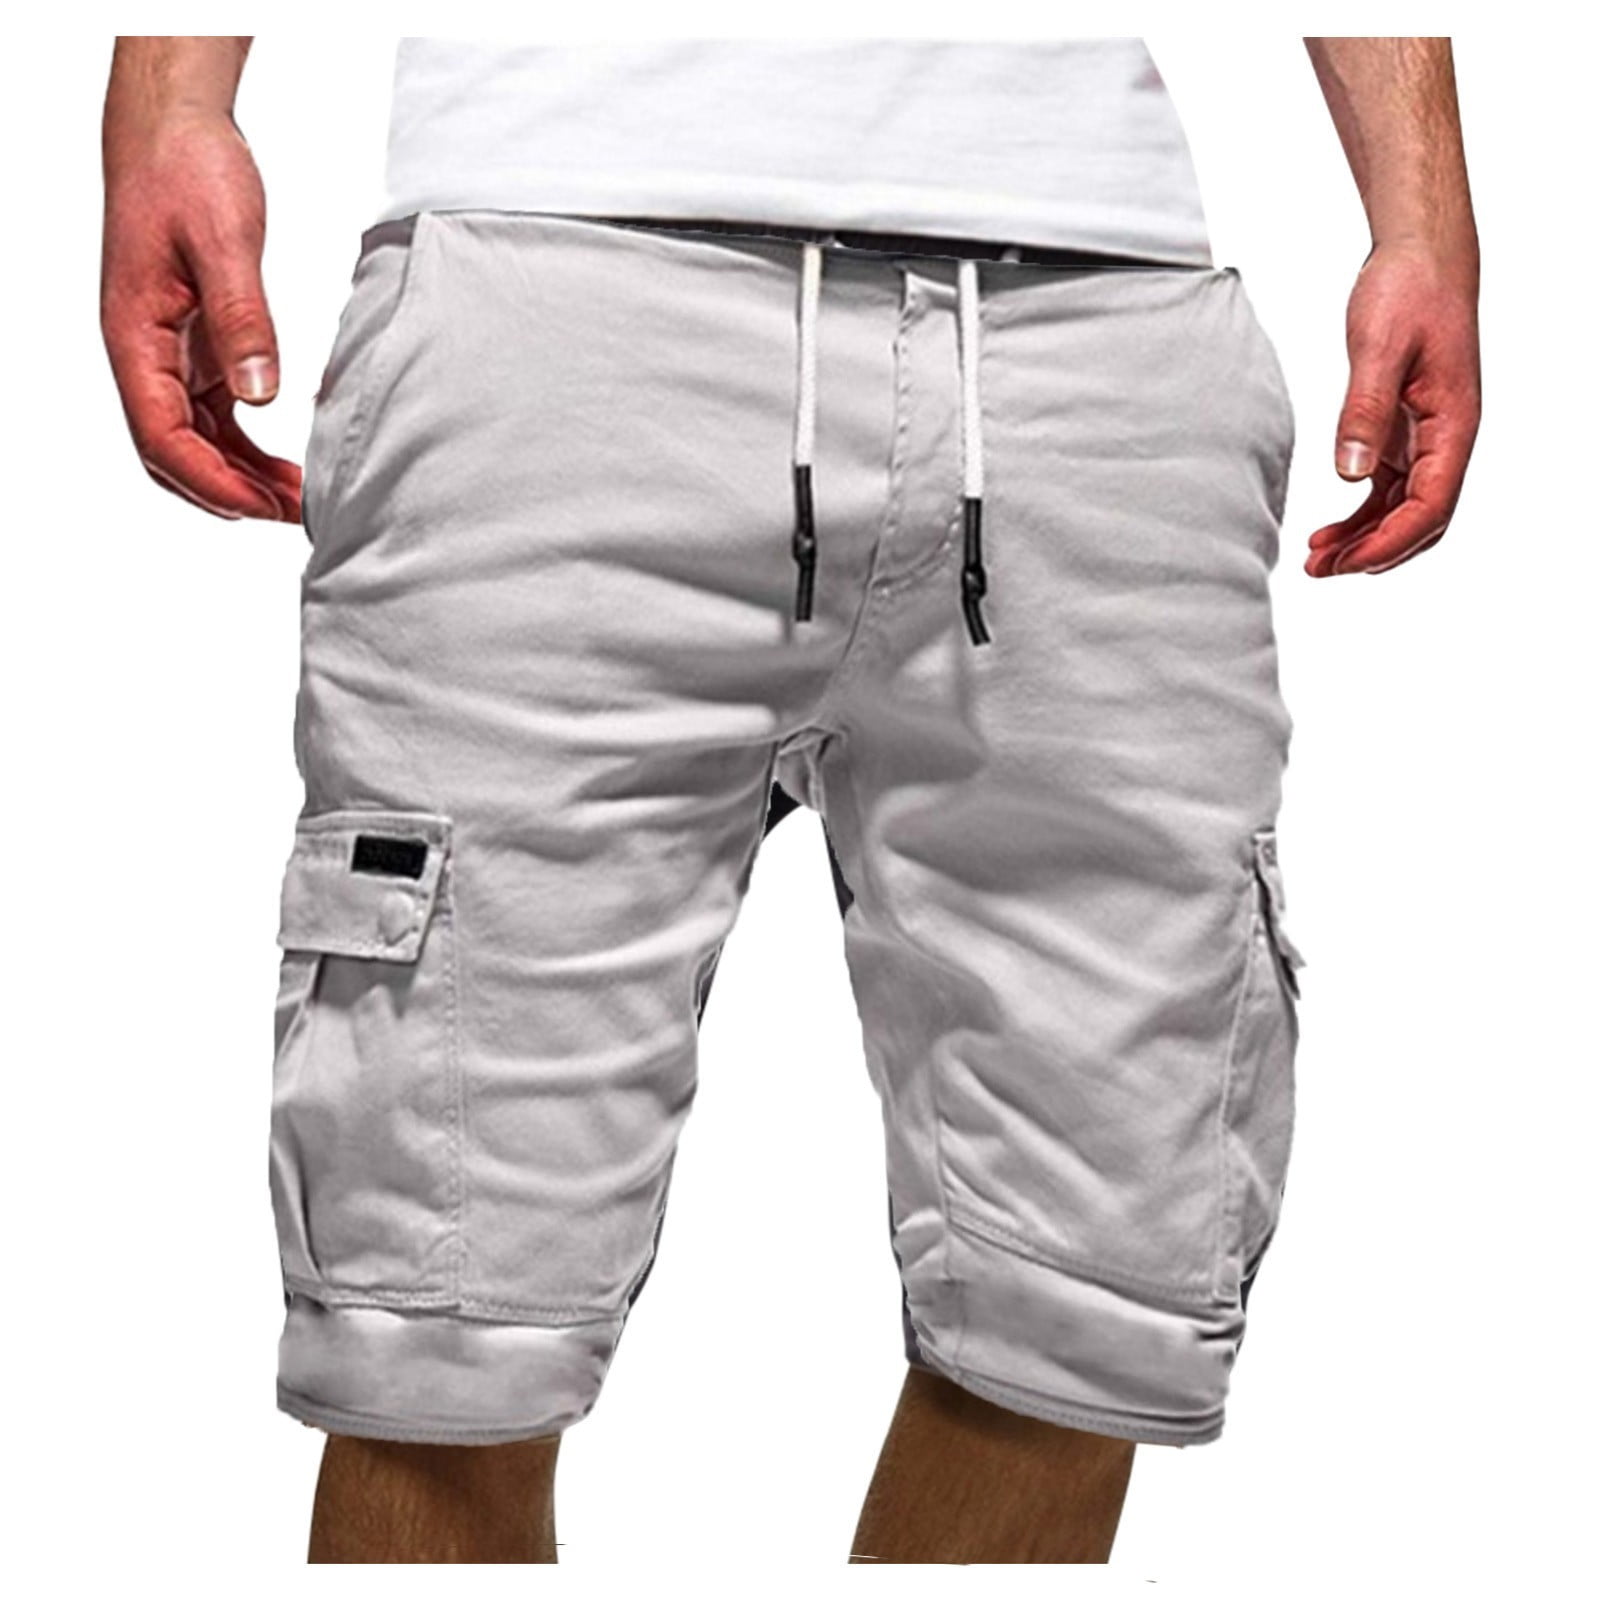 xiuh casual pants men's sports shorts size tooling summer plus casual ...